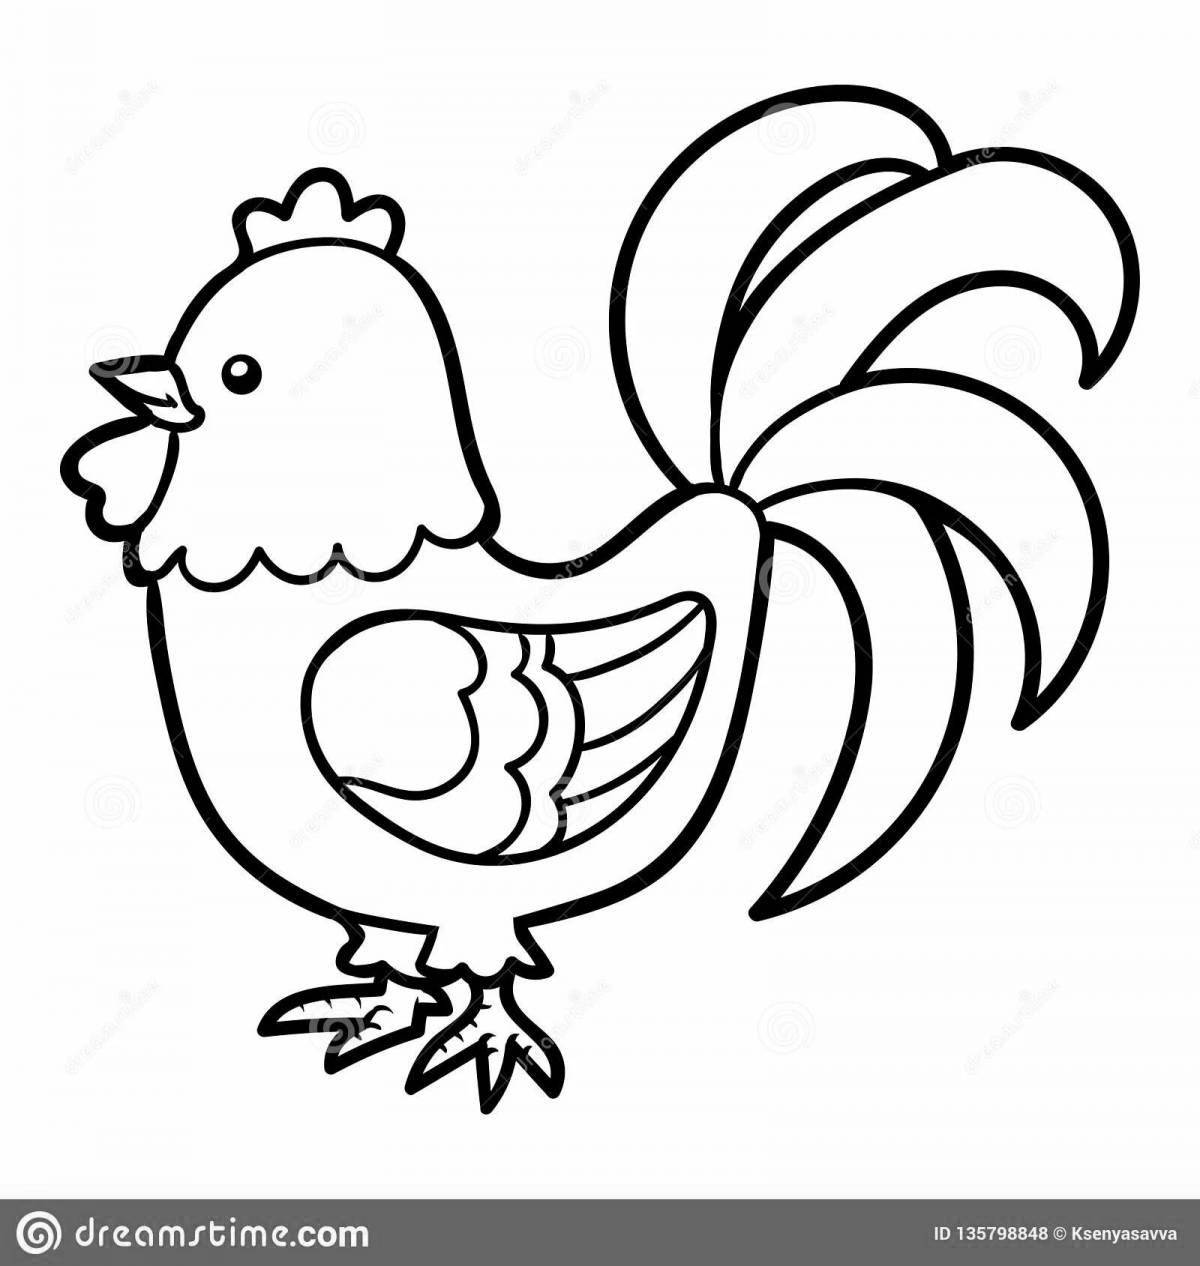 Coloring playful cockerel for kids 2-3 years old